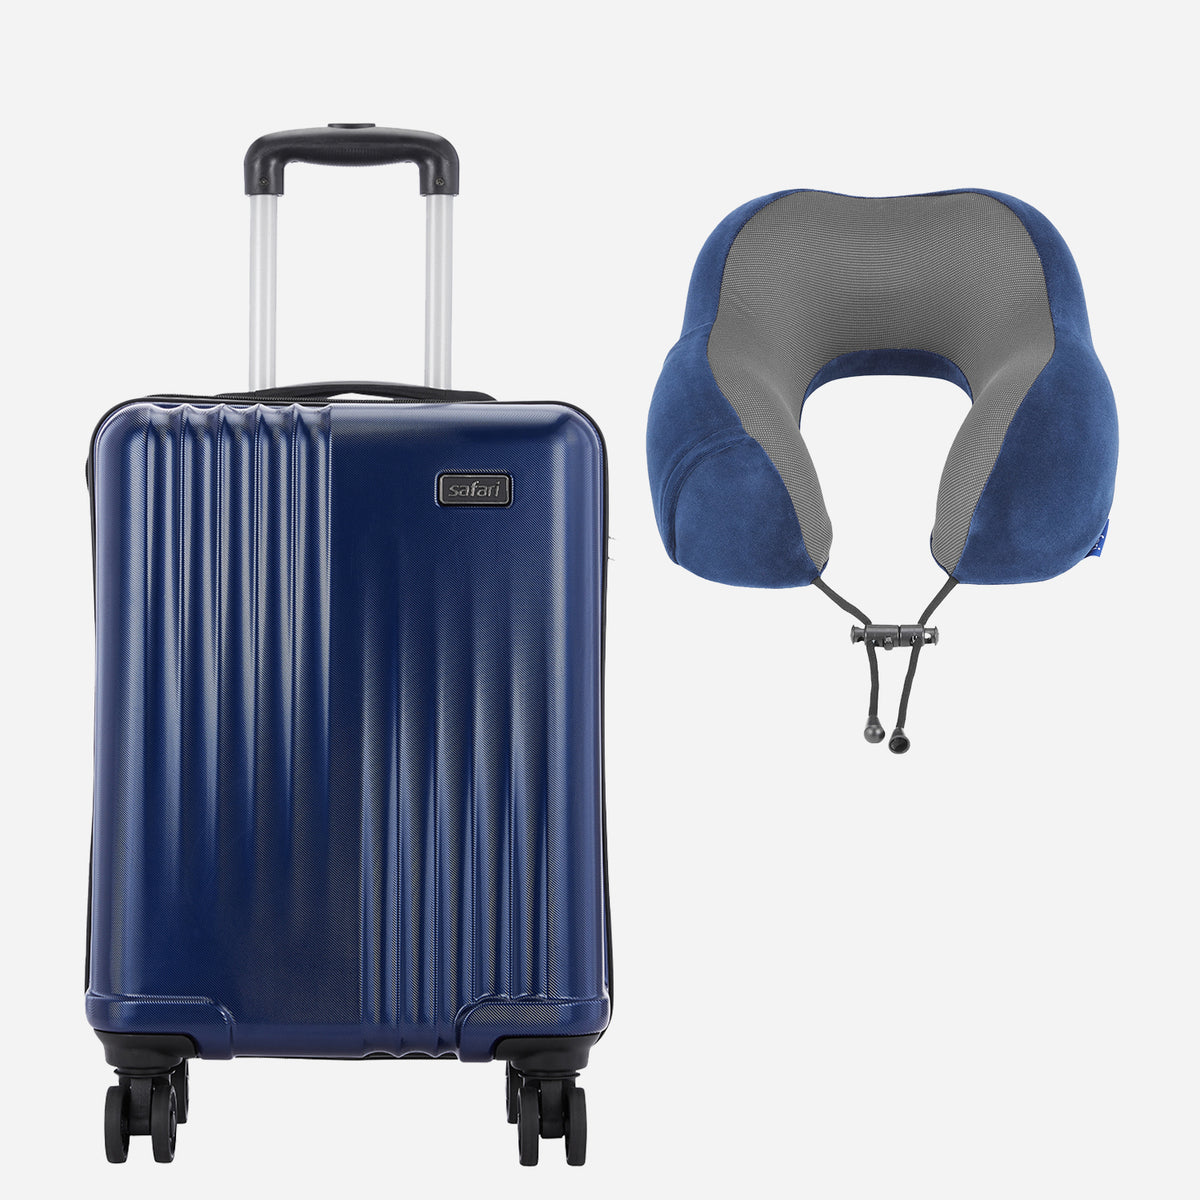 Ryder Cabin size Hard luggage and Curve Neckpillow in Combo Set - Blue